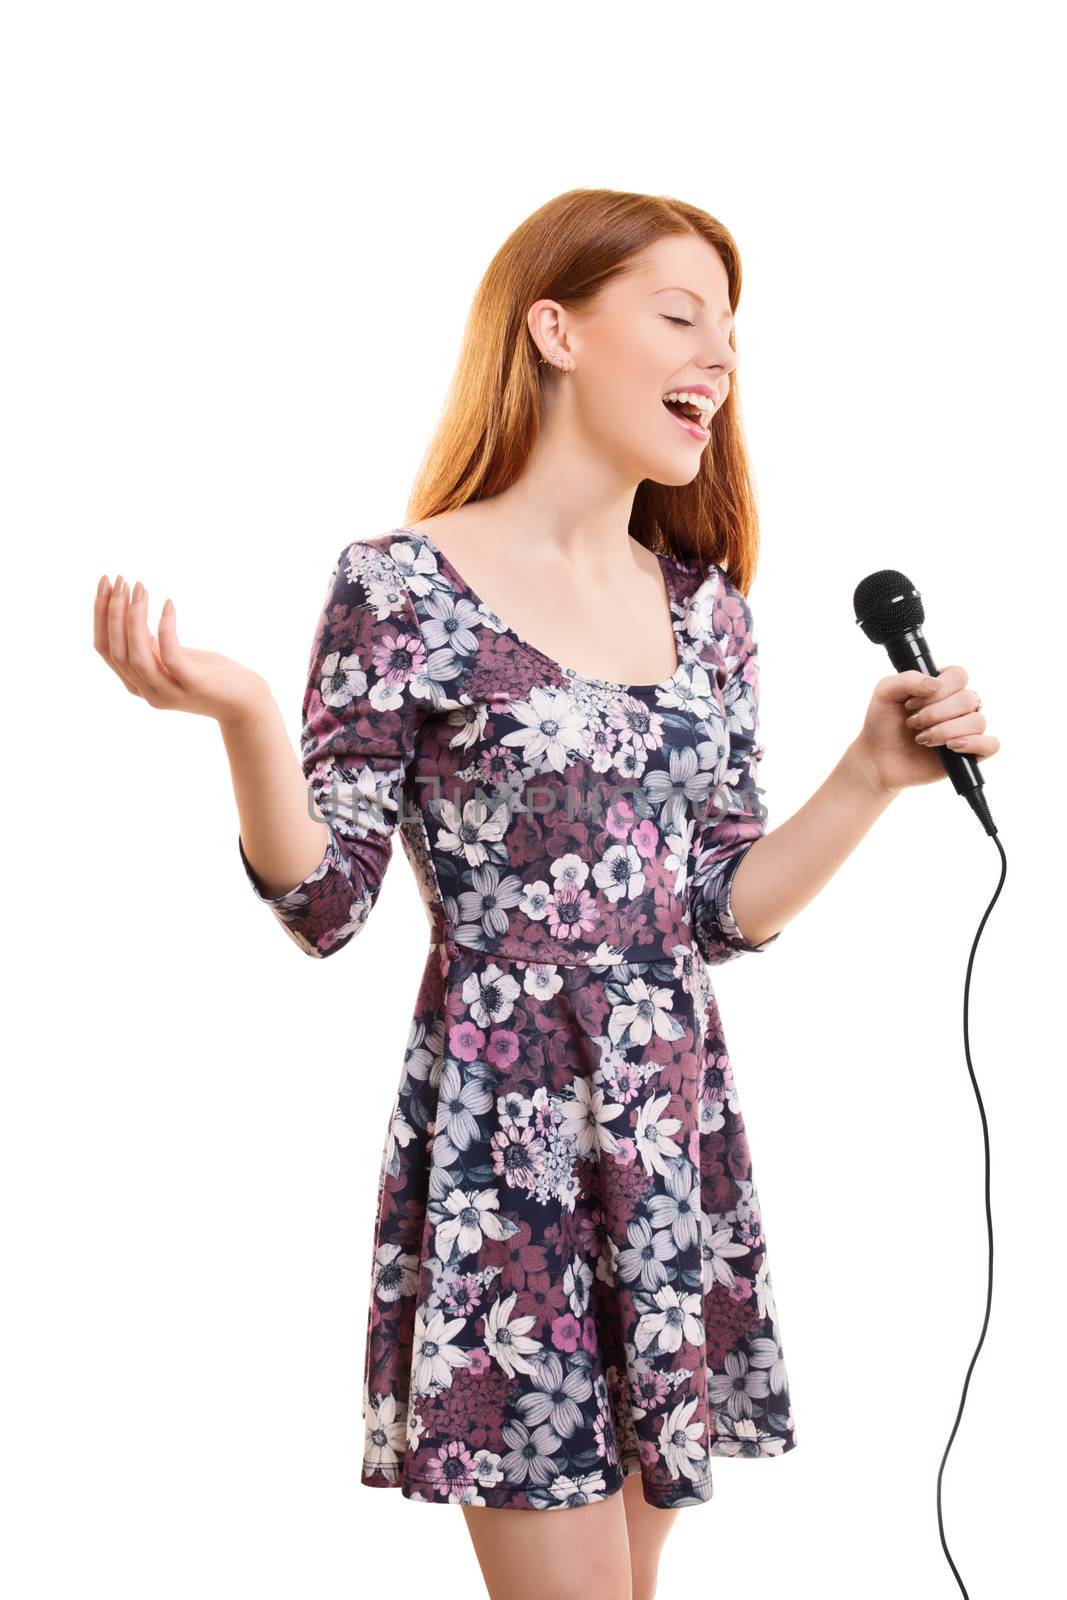 Beautiful young girl singing by Mendelex